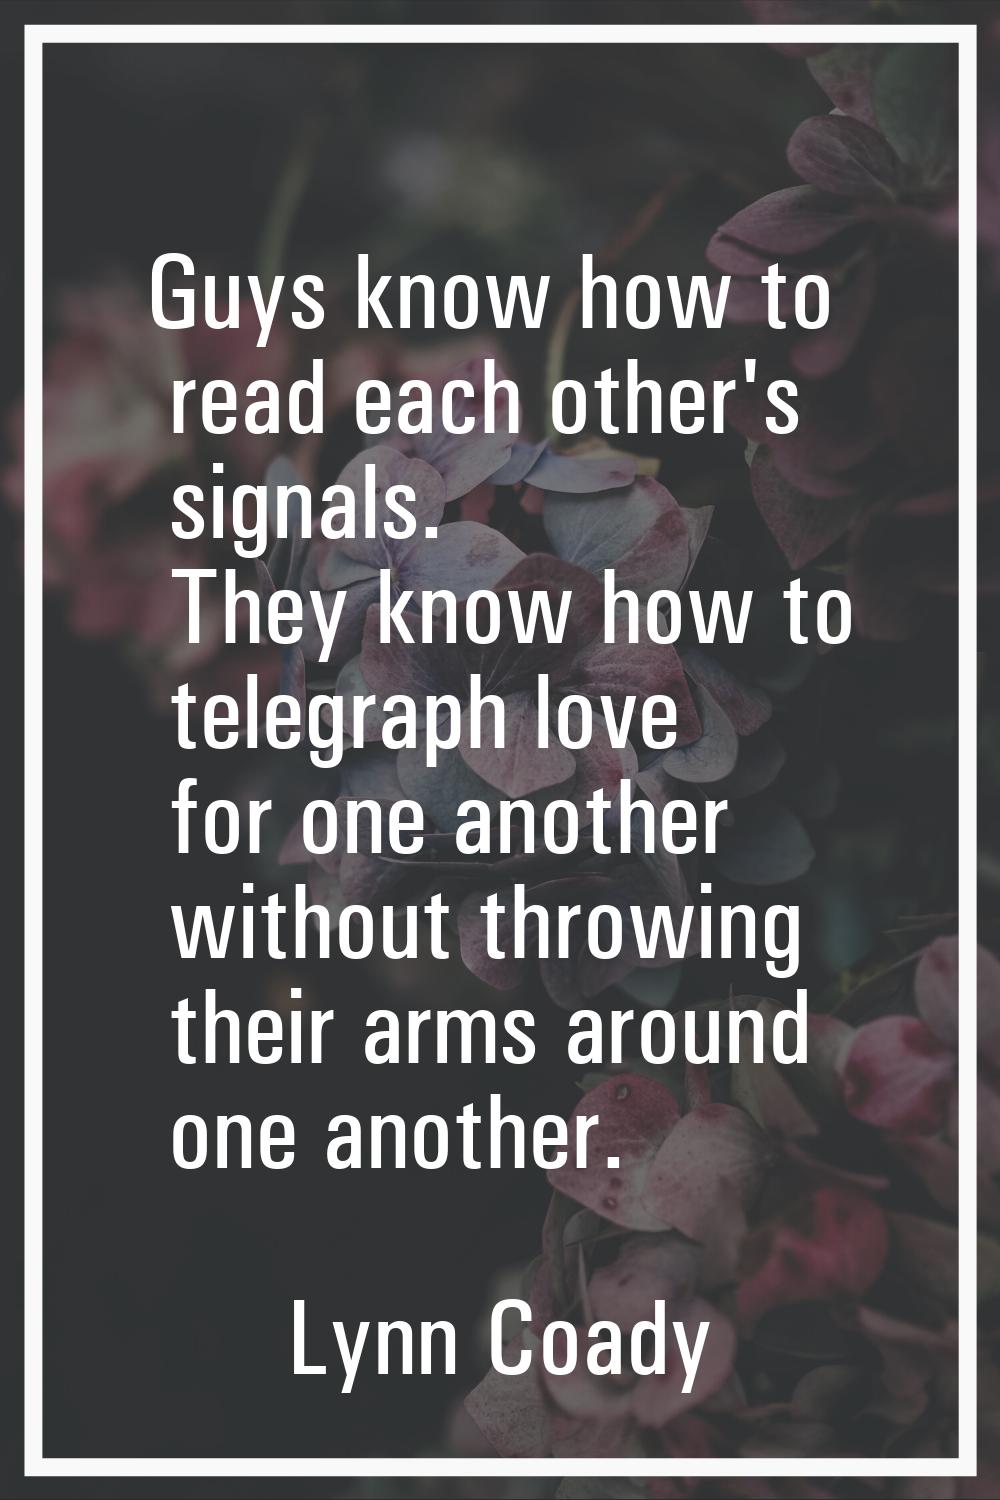 Guys know how to read each other's signals. They know how to telegraph love for one another without